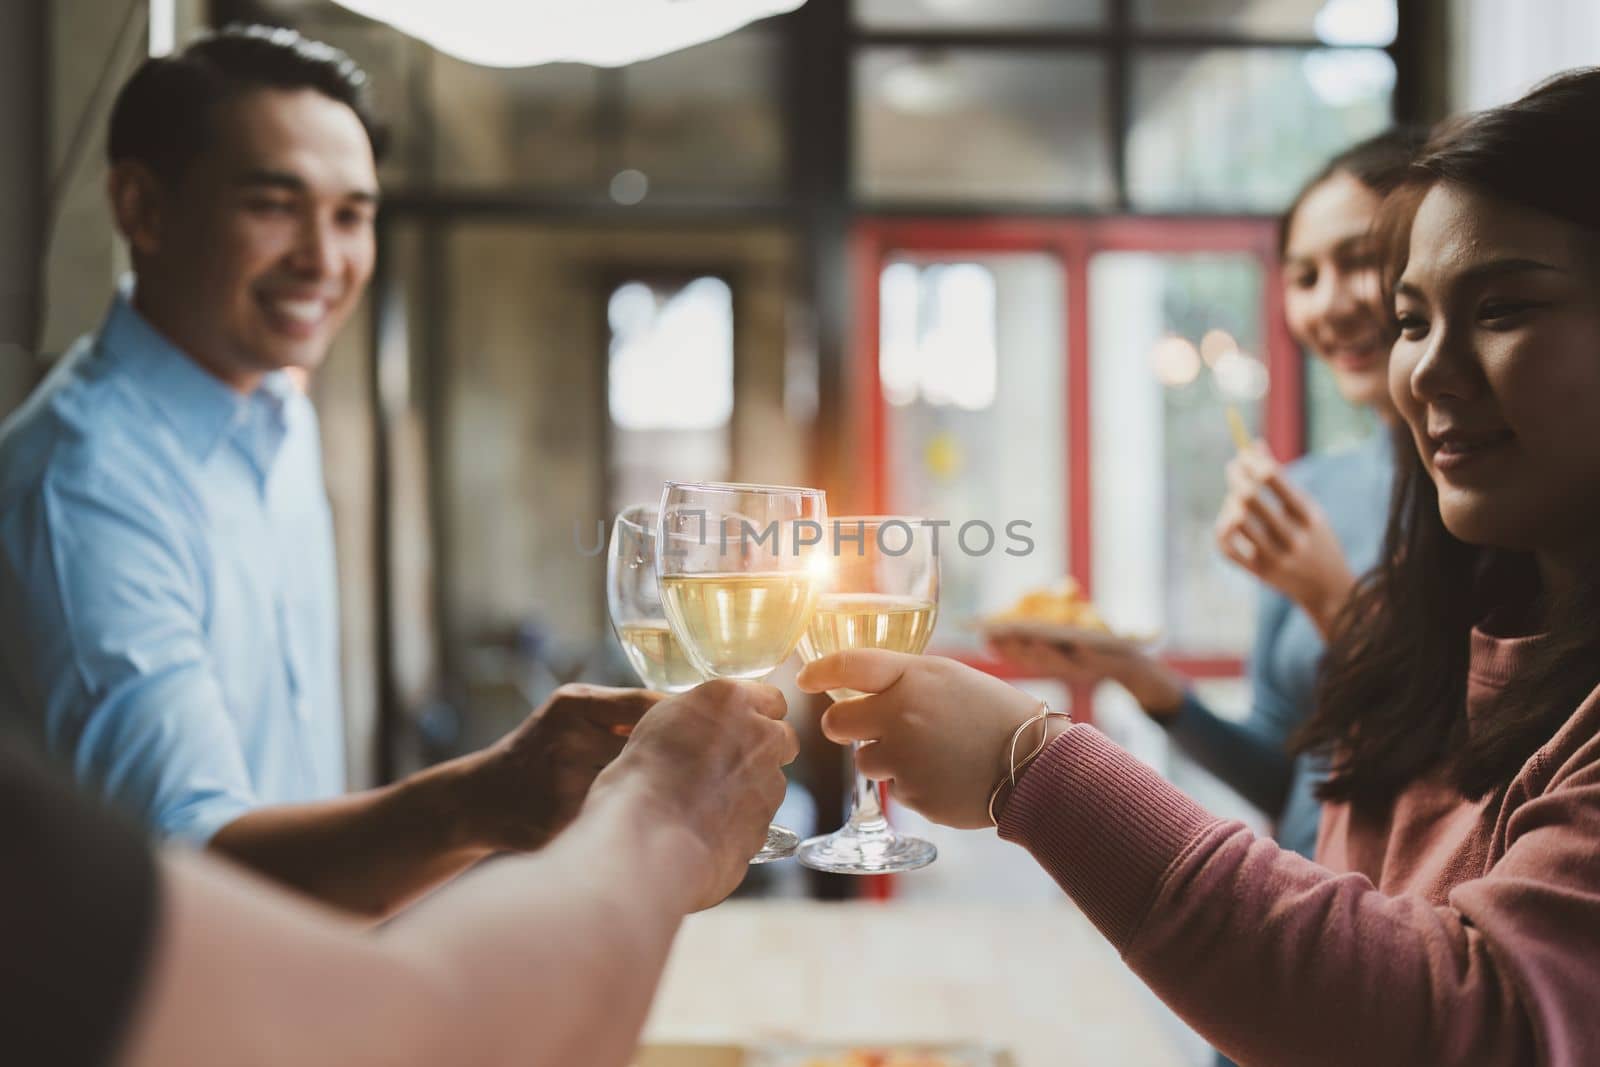 Friends at birthday party clinking glasses with champagne and pizza, enjoying Christmas vacation, pizza on the table. Holiday Party event